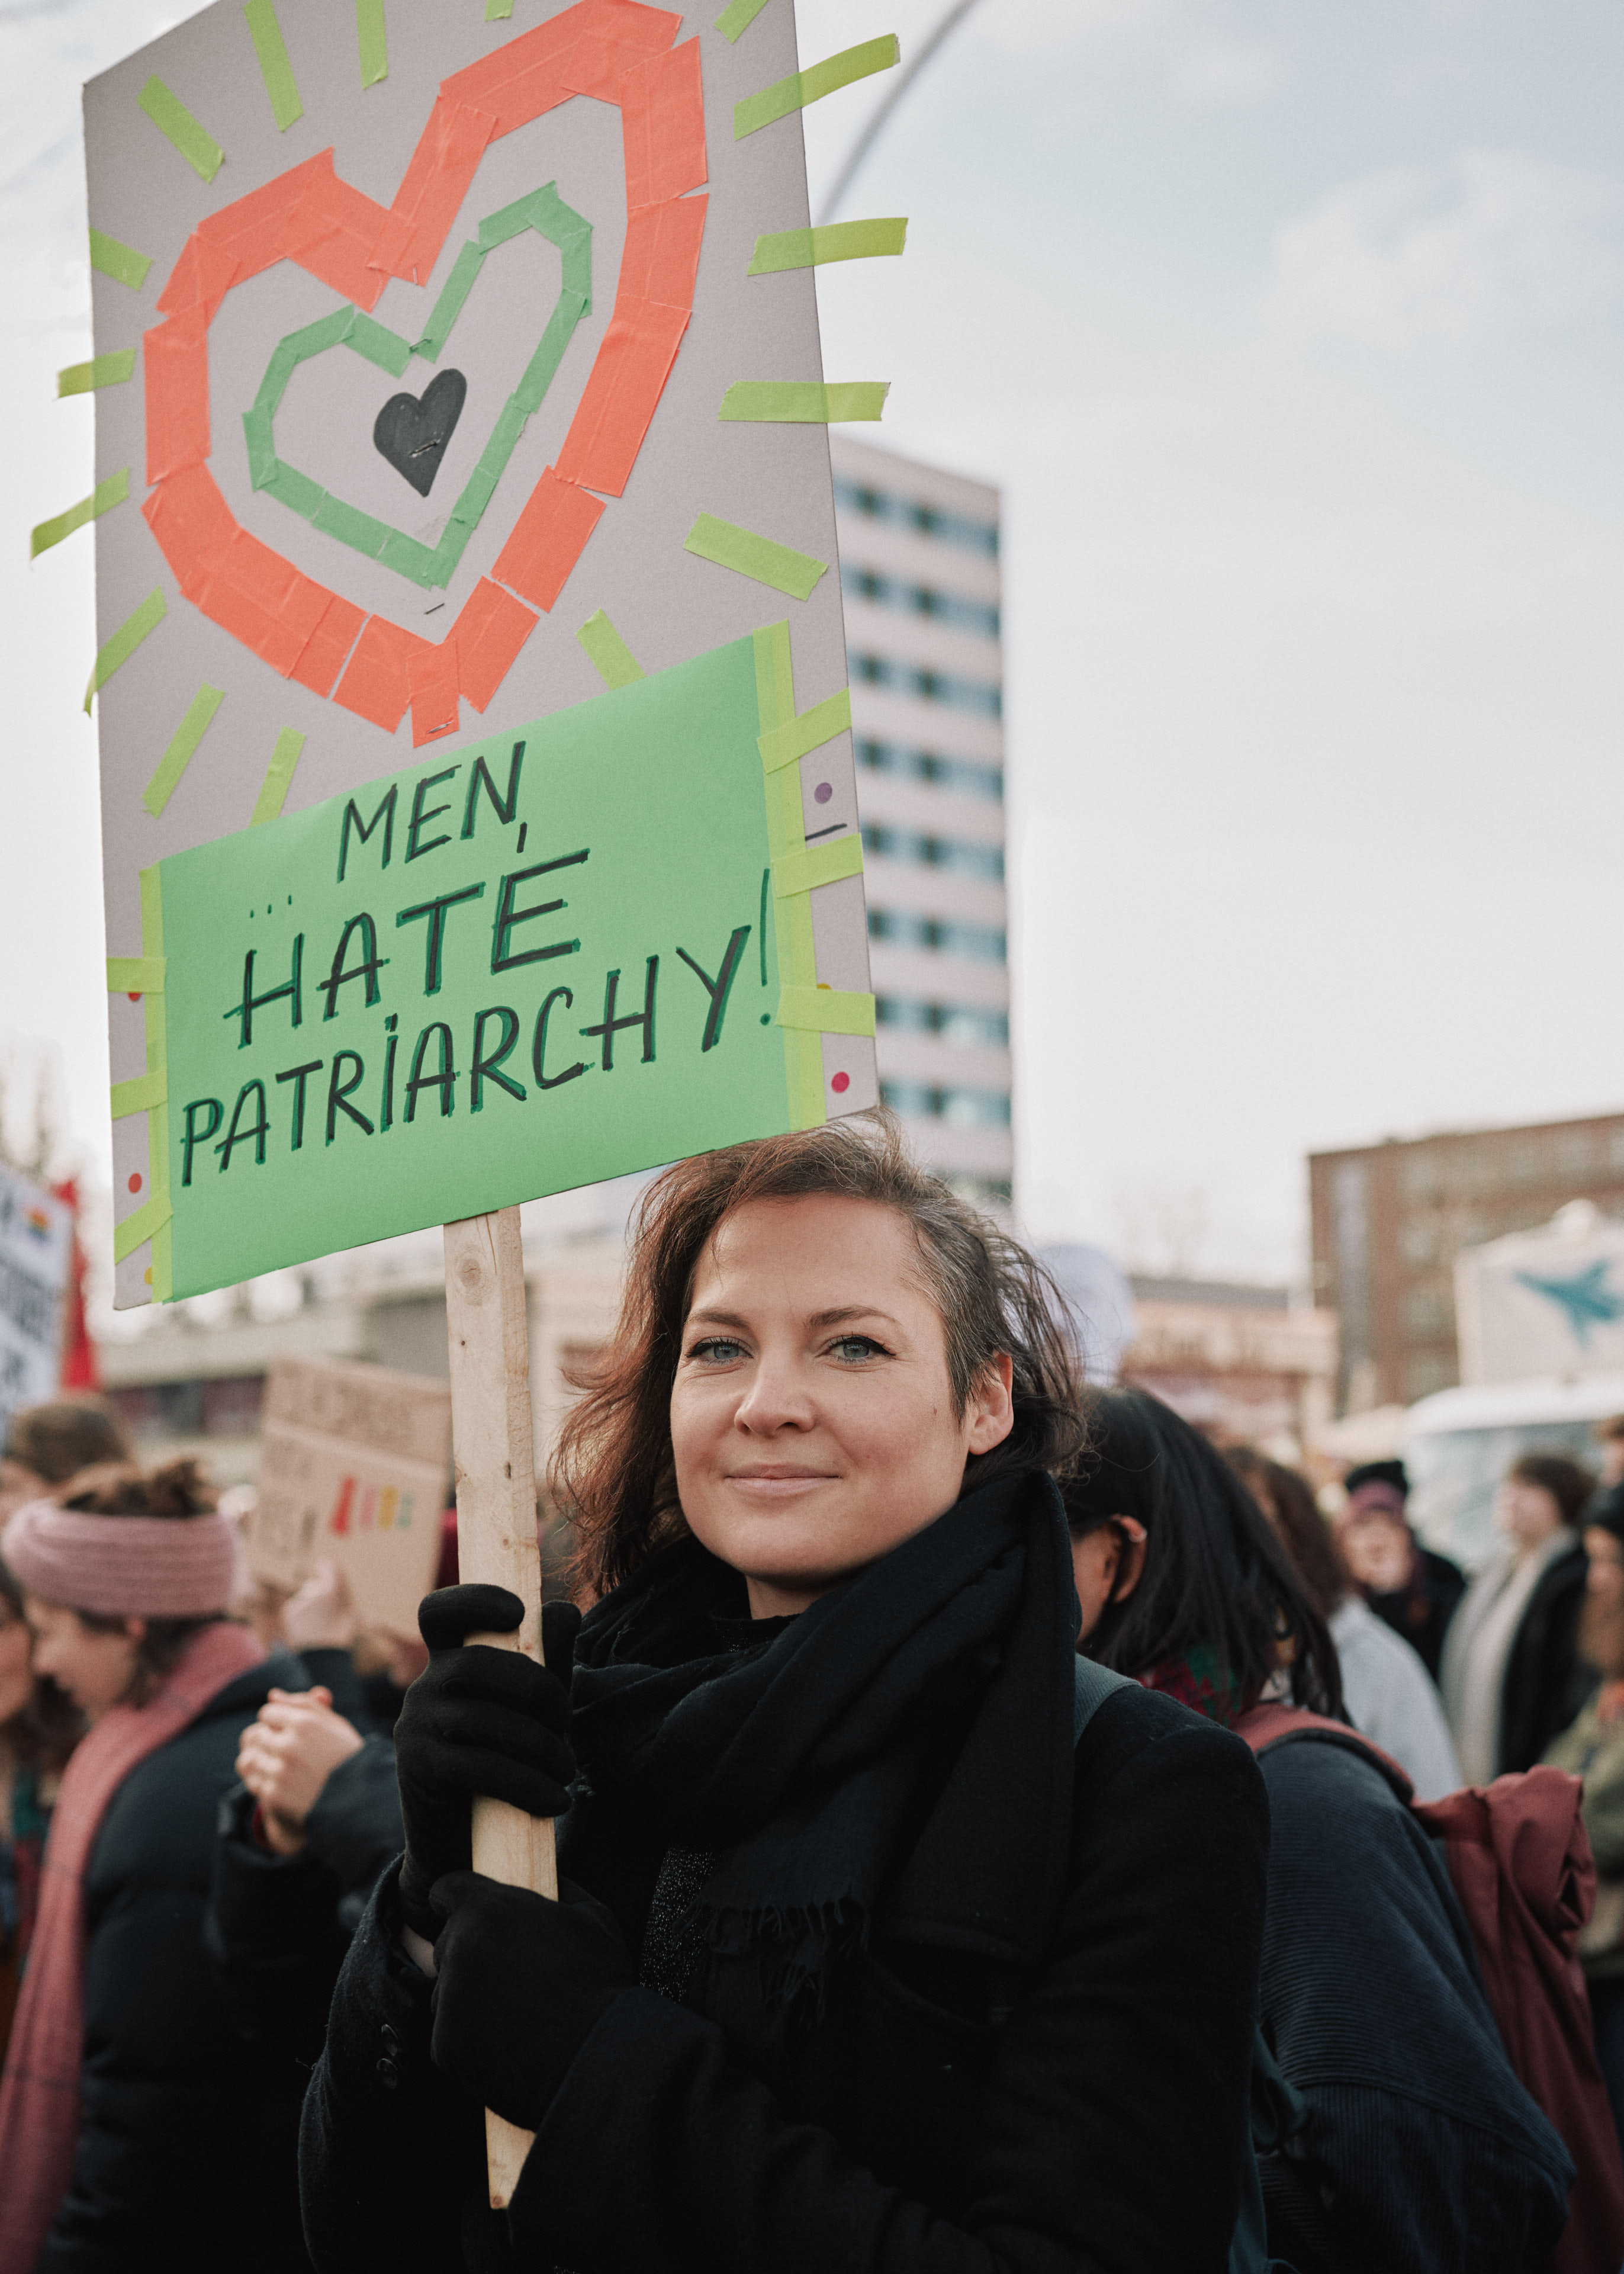 Alina holds a sign "Men hate patriarchy"